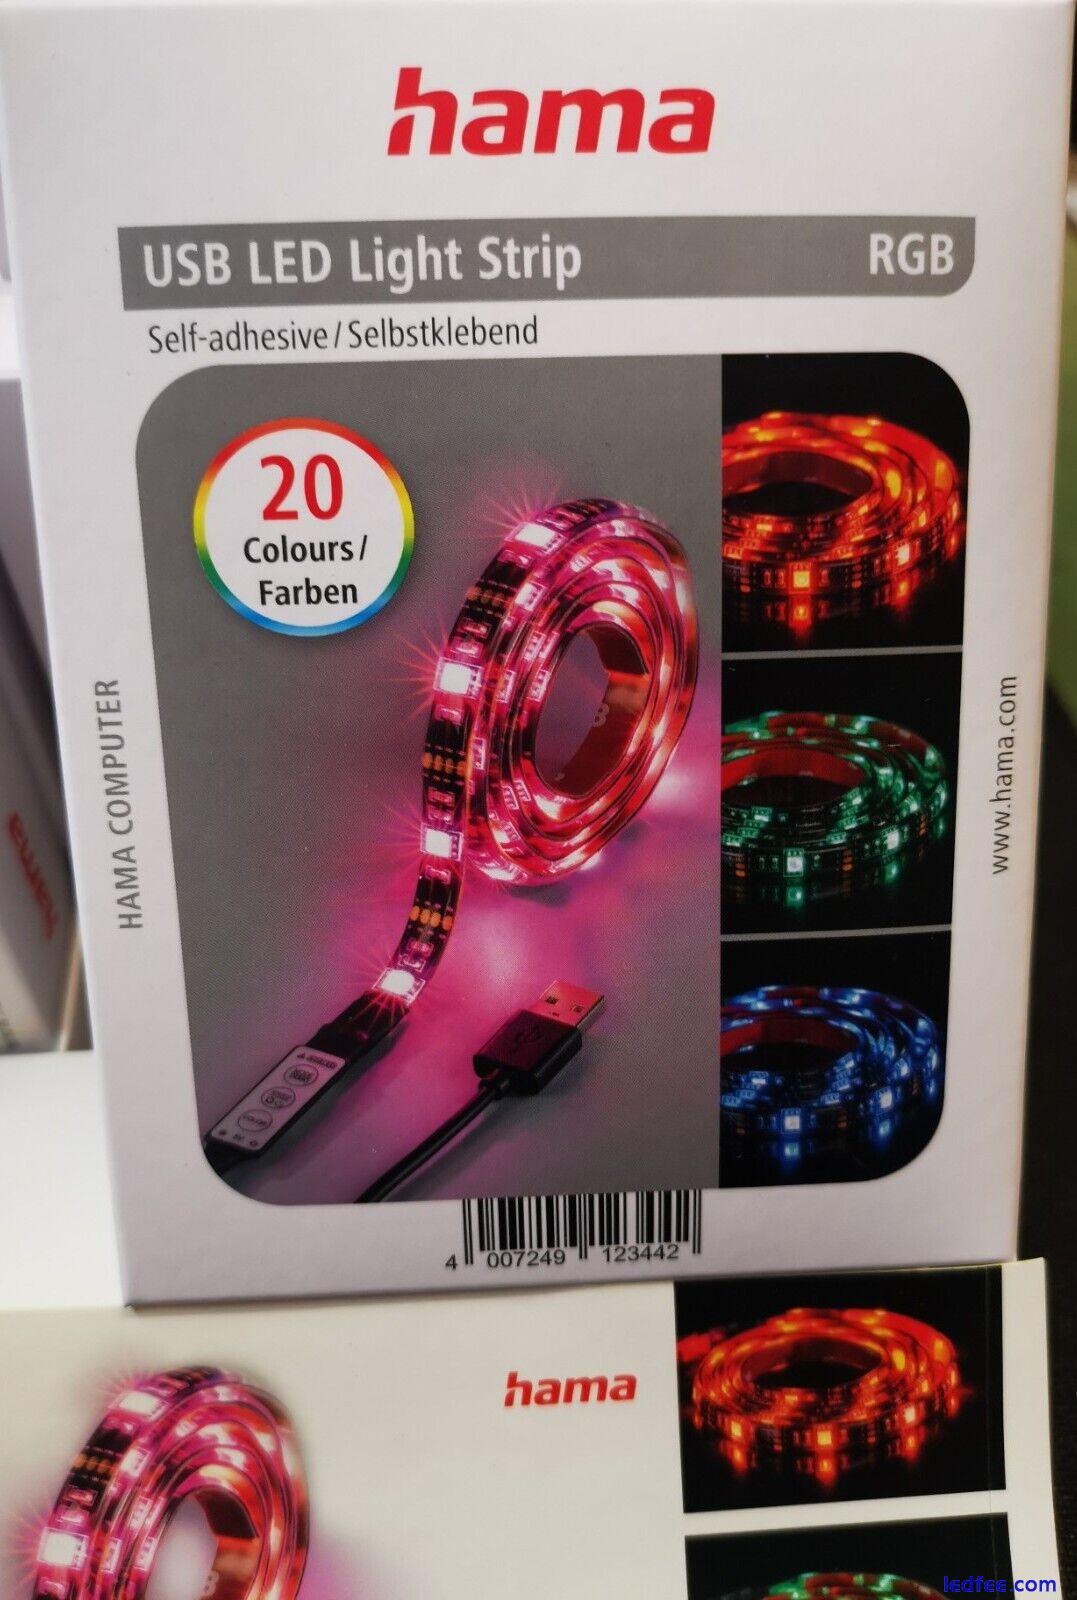 USB LED LIGHT STRIPS by hama 20 DIFFERENT COLOURS RETAIL BOXED X 12 BRAND NEW 1 